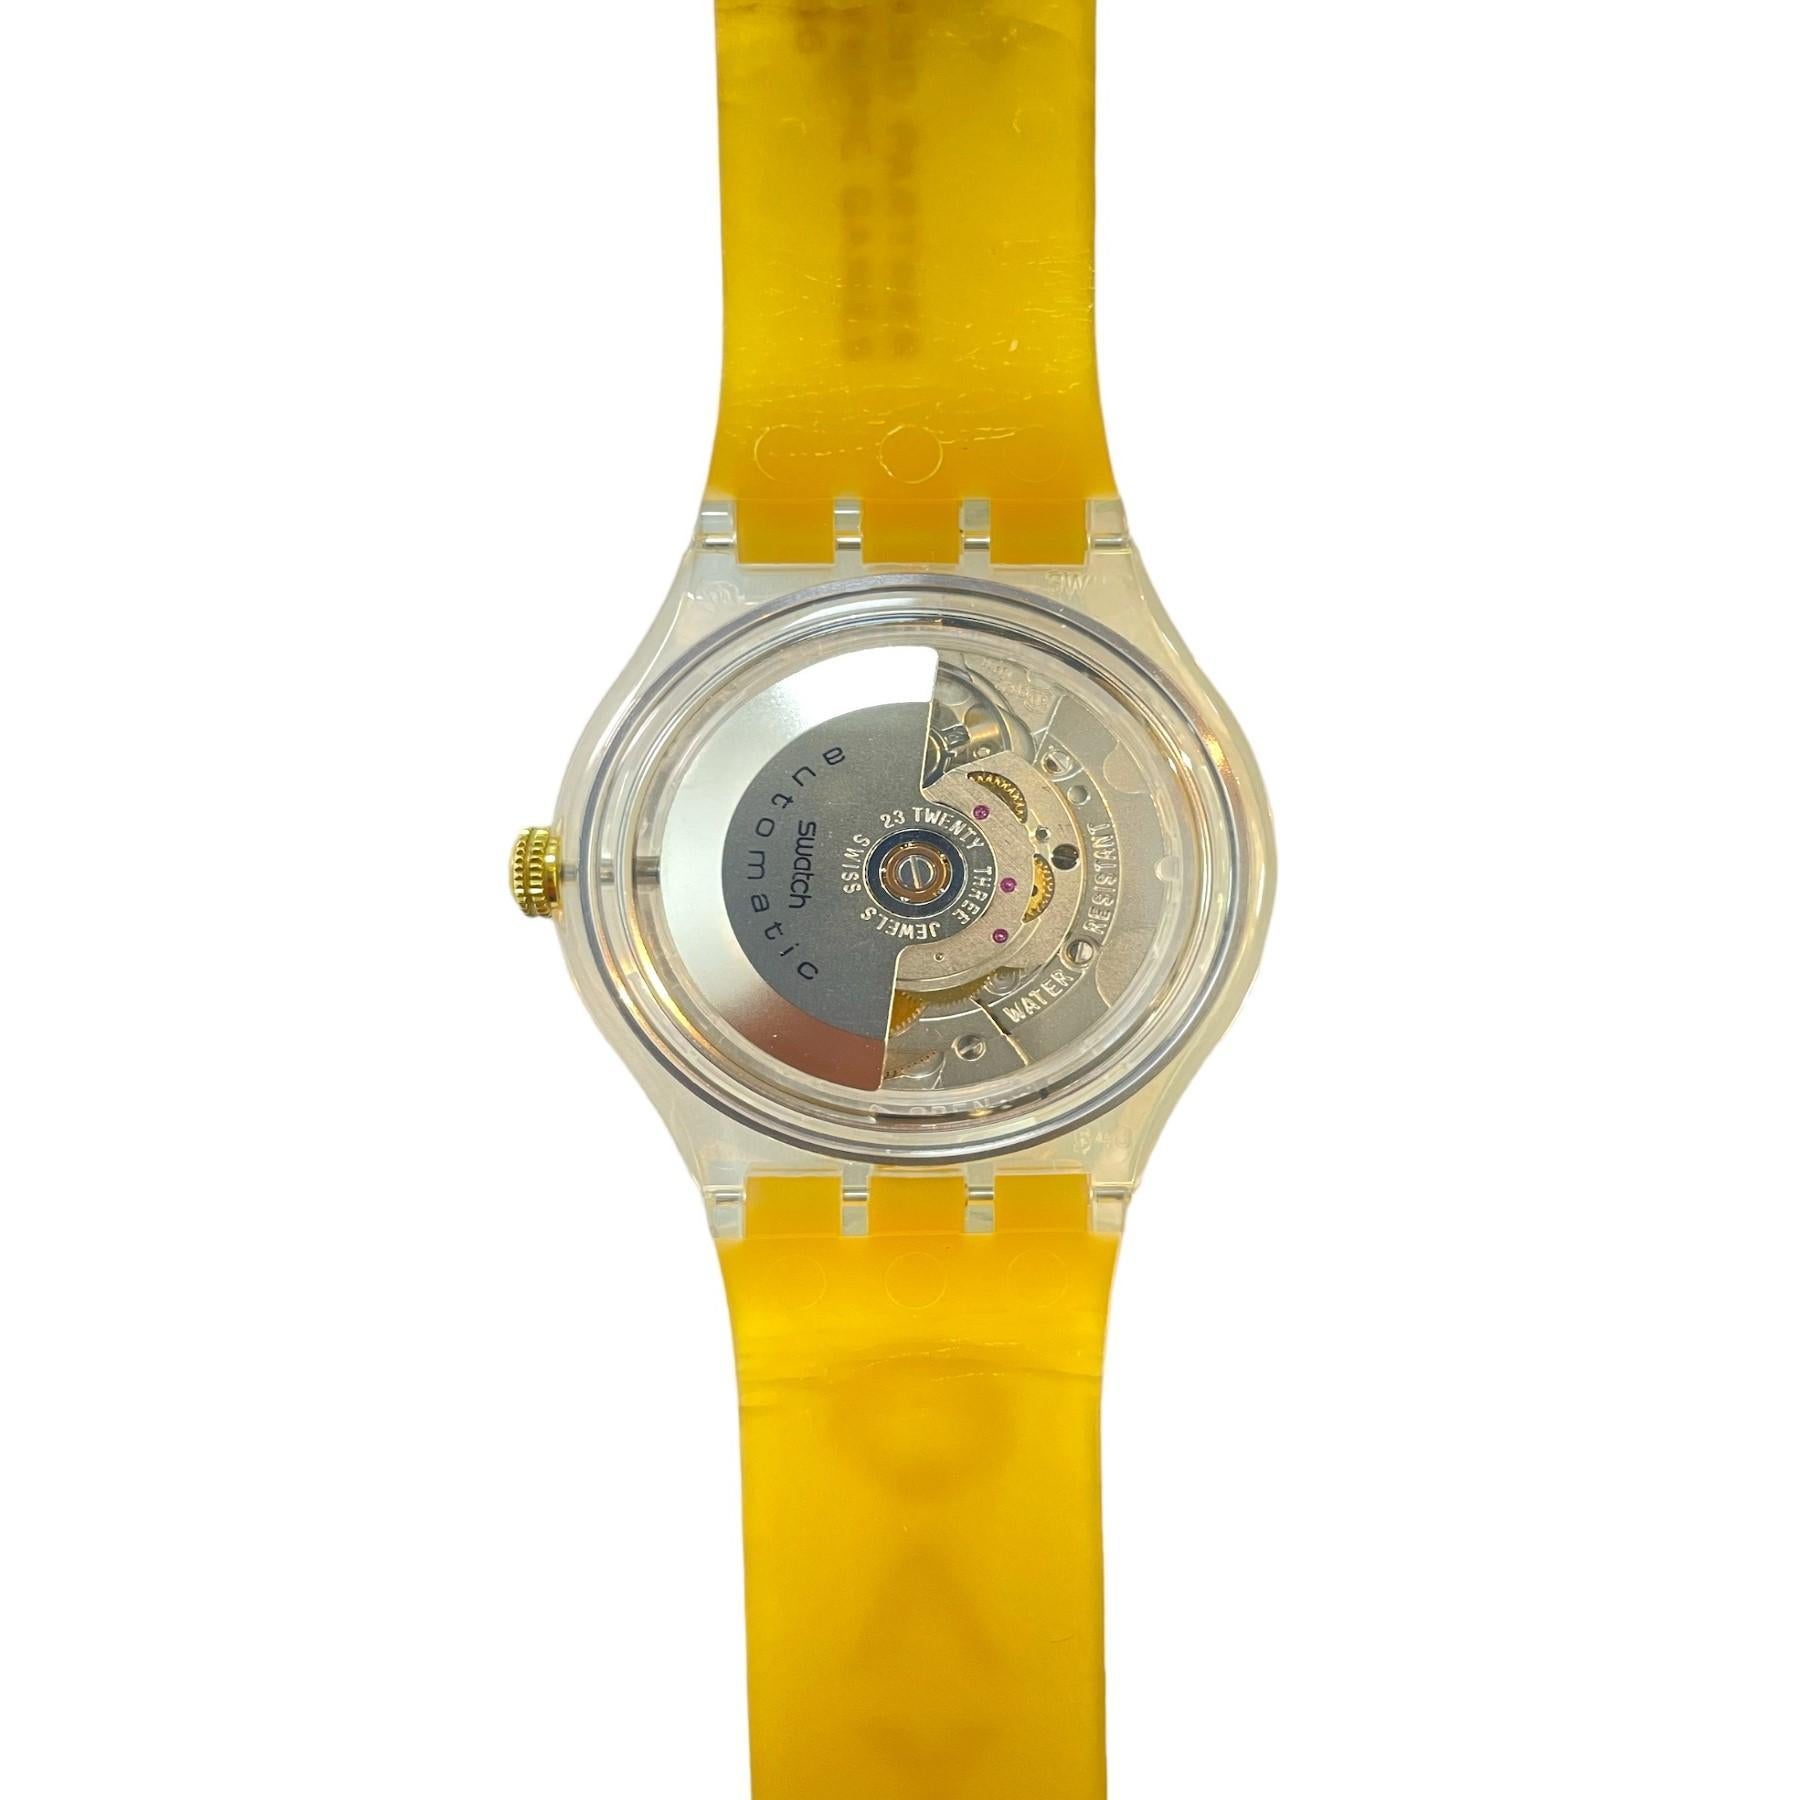 swatch ag 1996